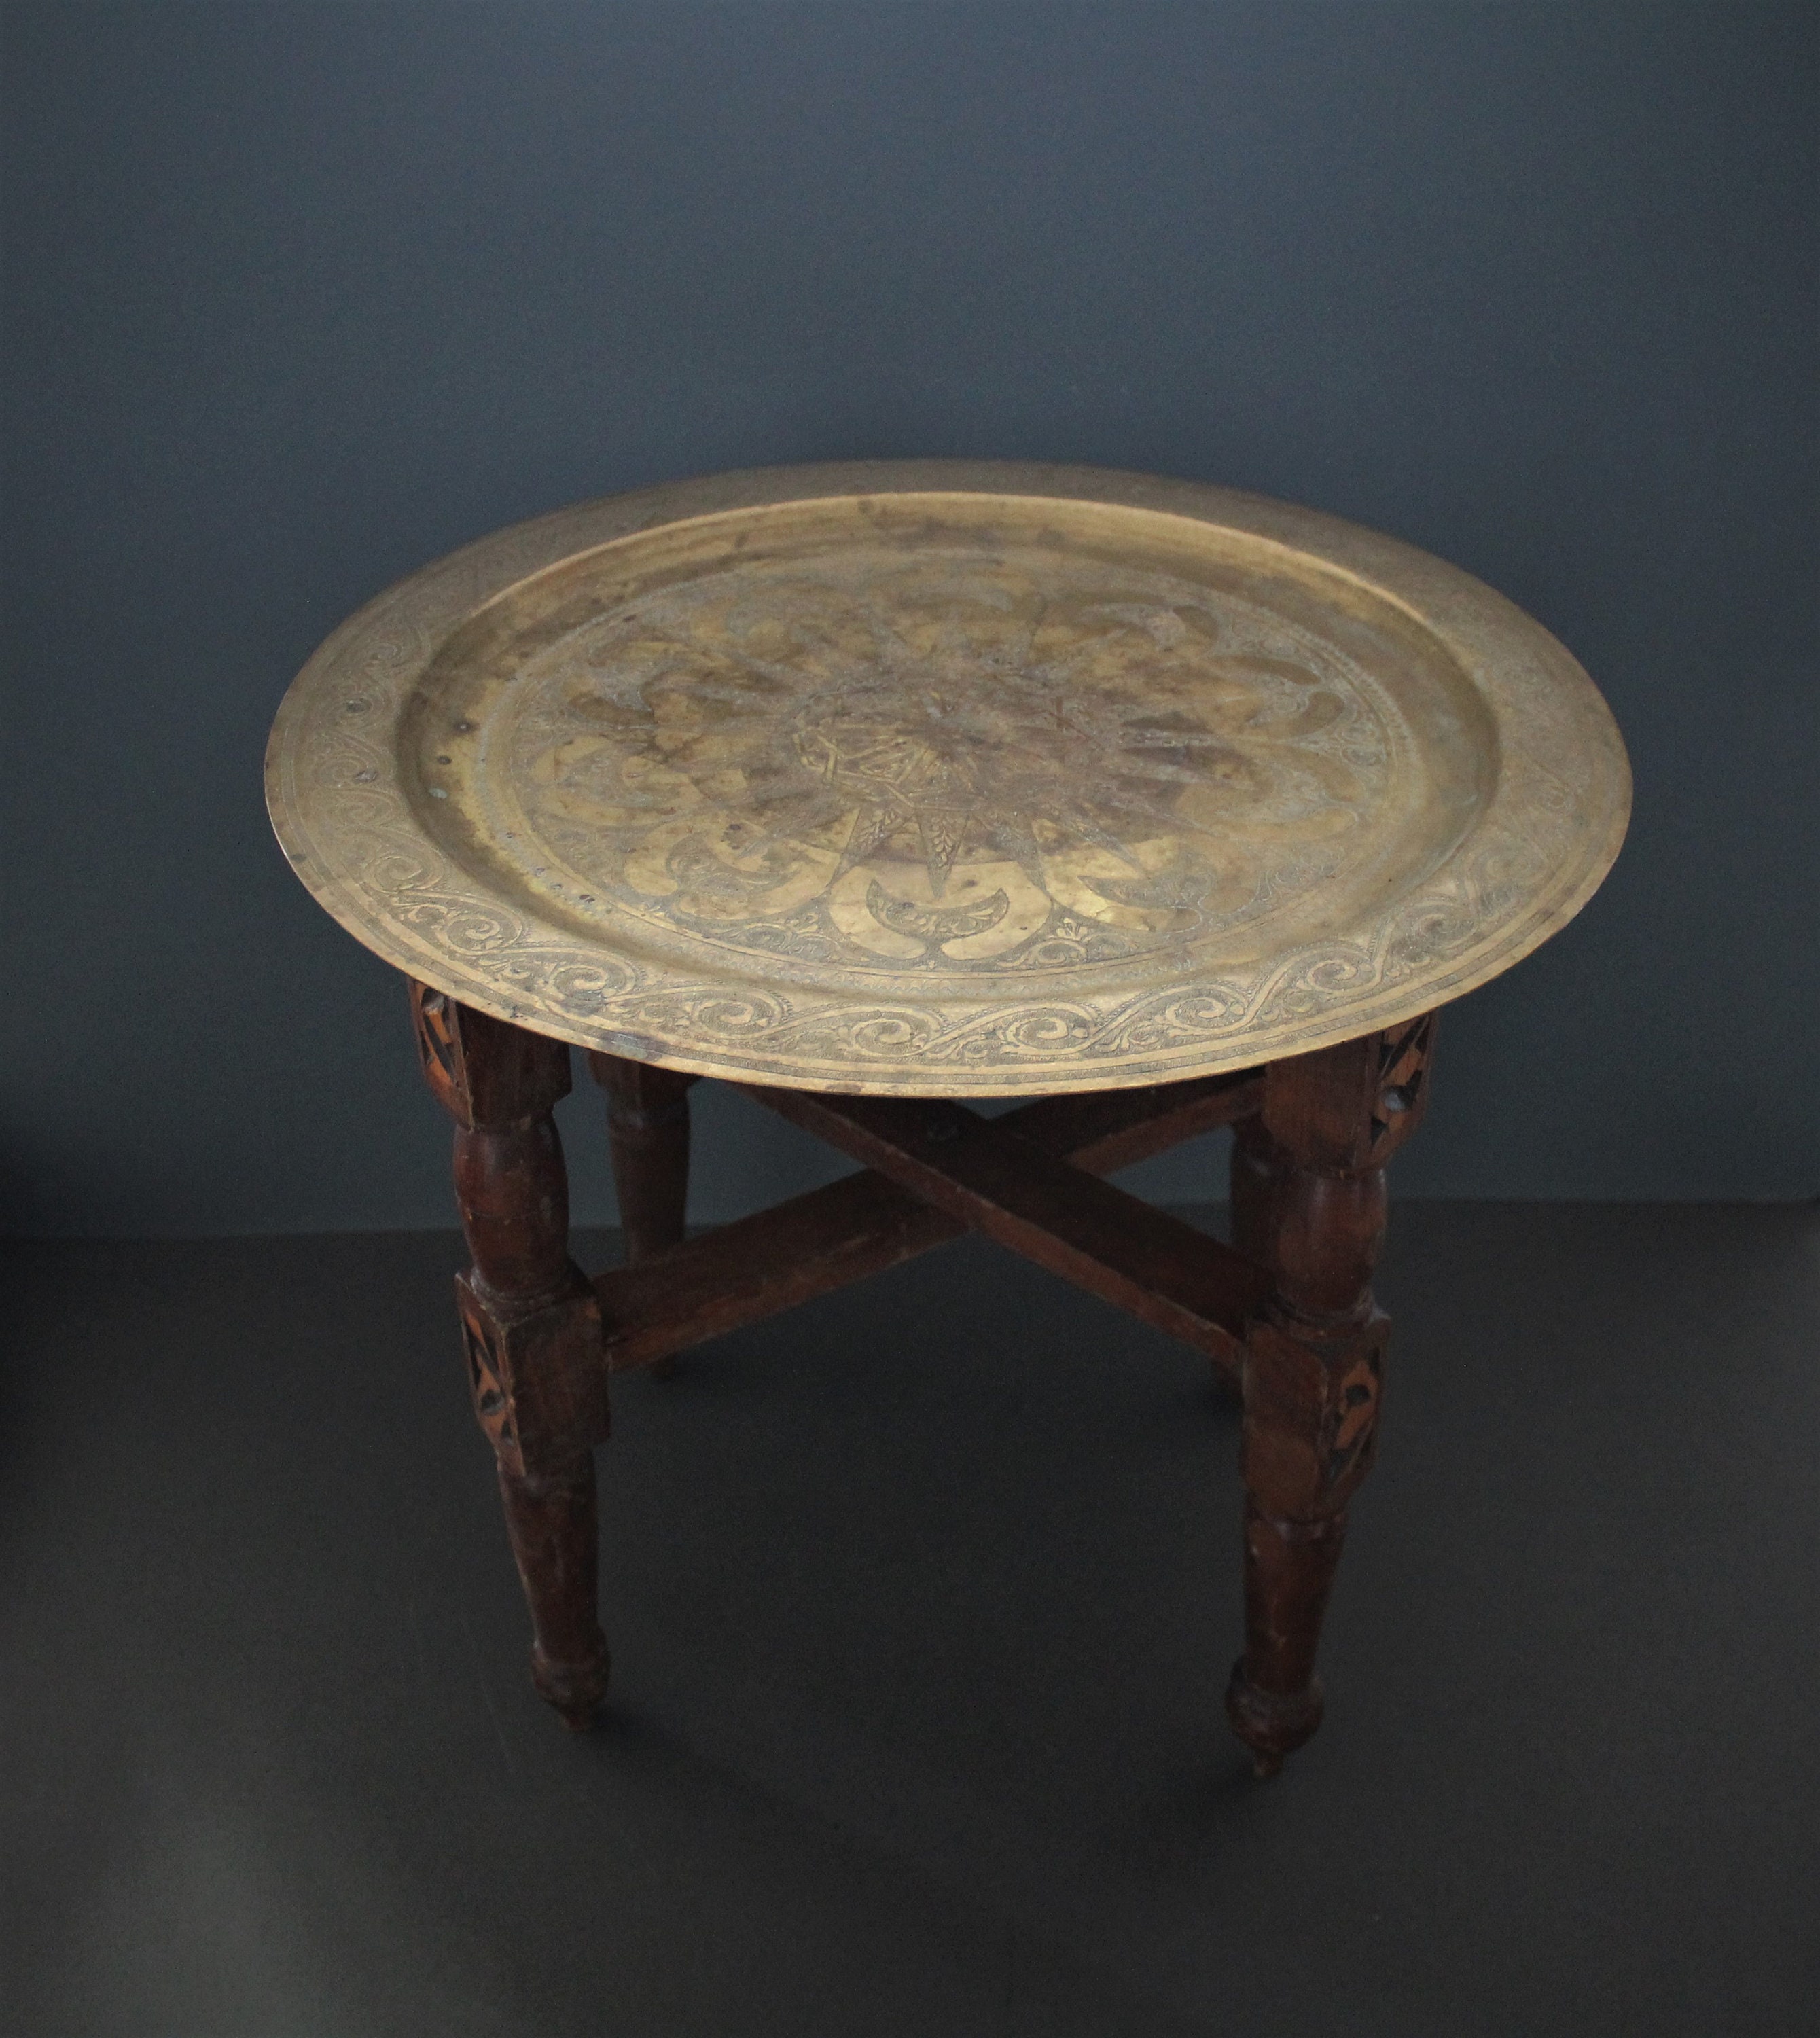 Vintage Moroccan Tea Table. Carved Folding Base With Bronze Charger. Aged Patina.